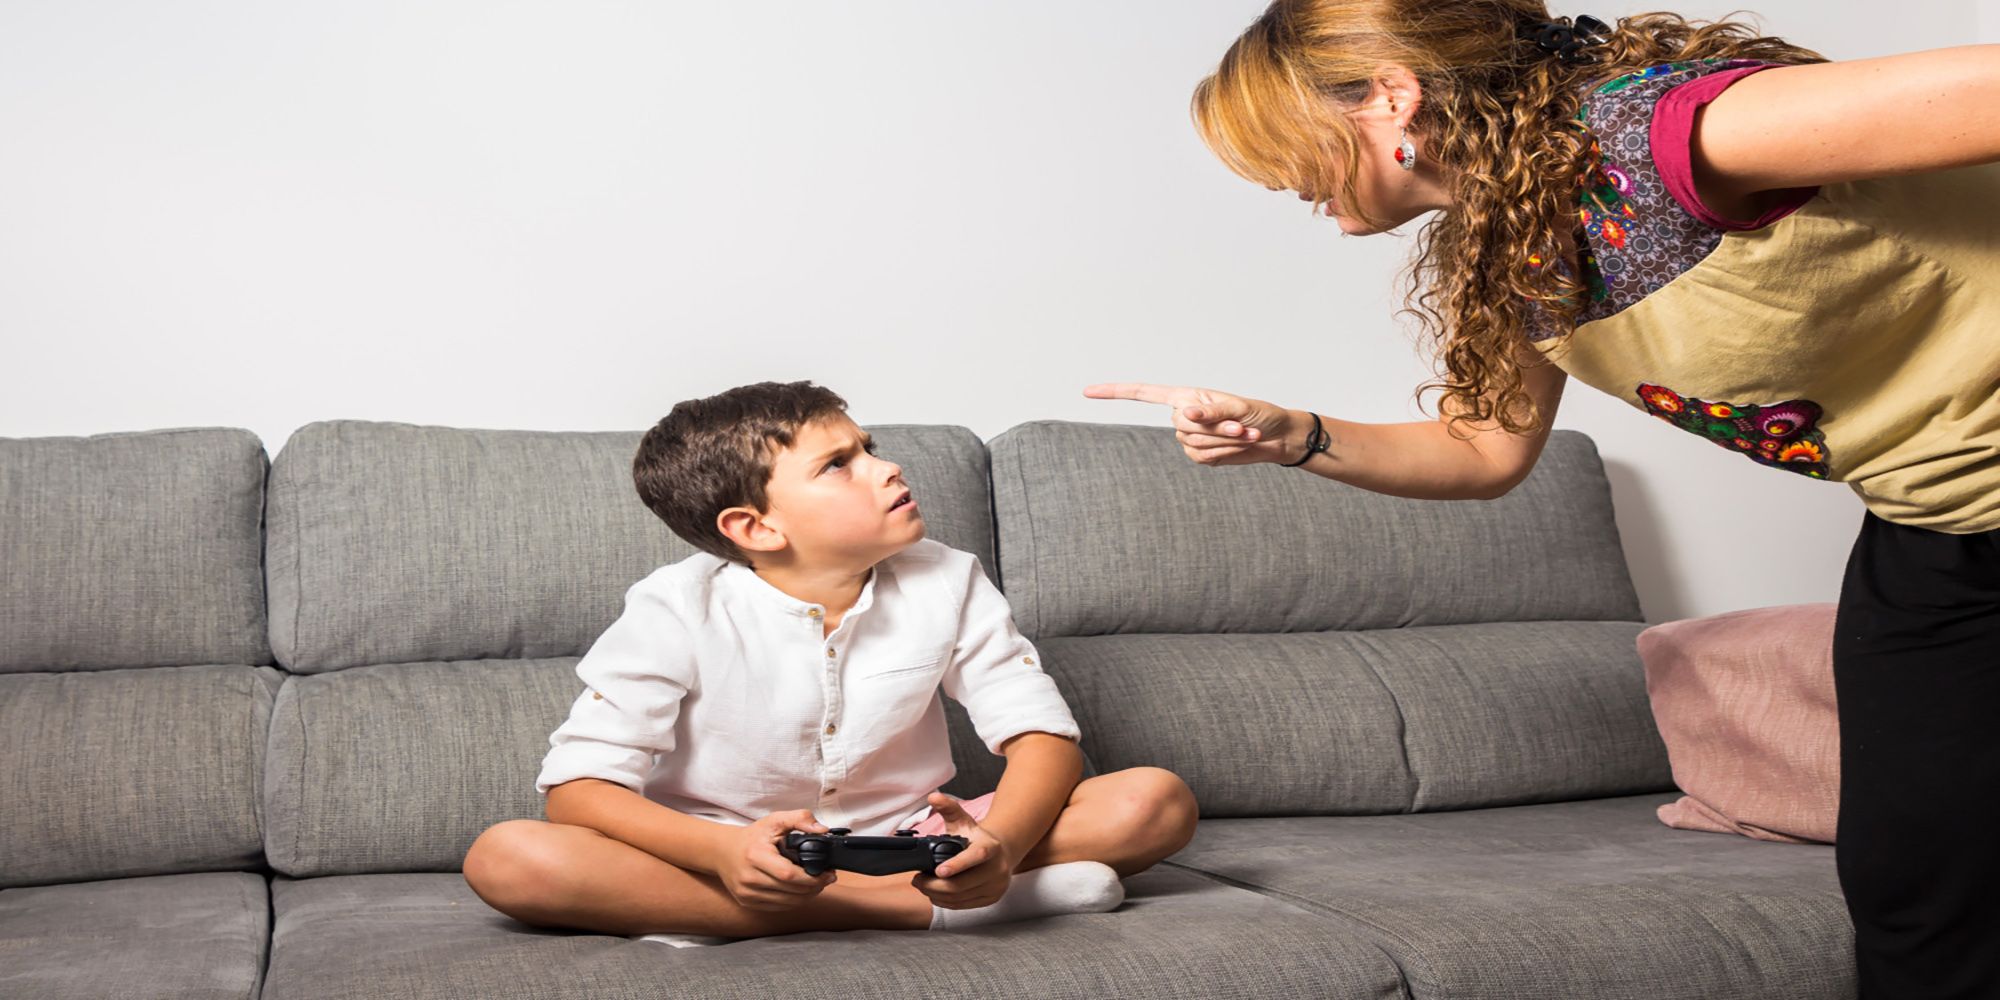 A mother yells at her son, who is sitting on a couch trying to play a video game.